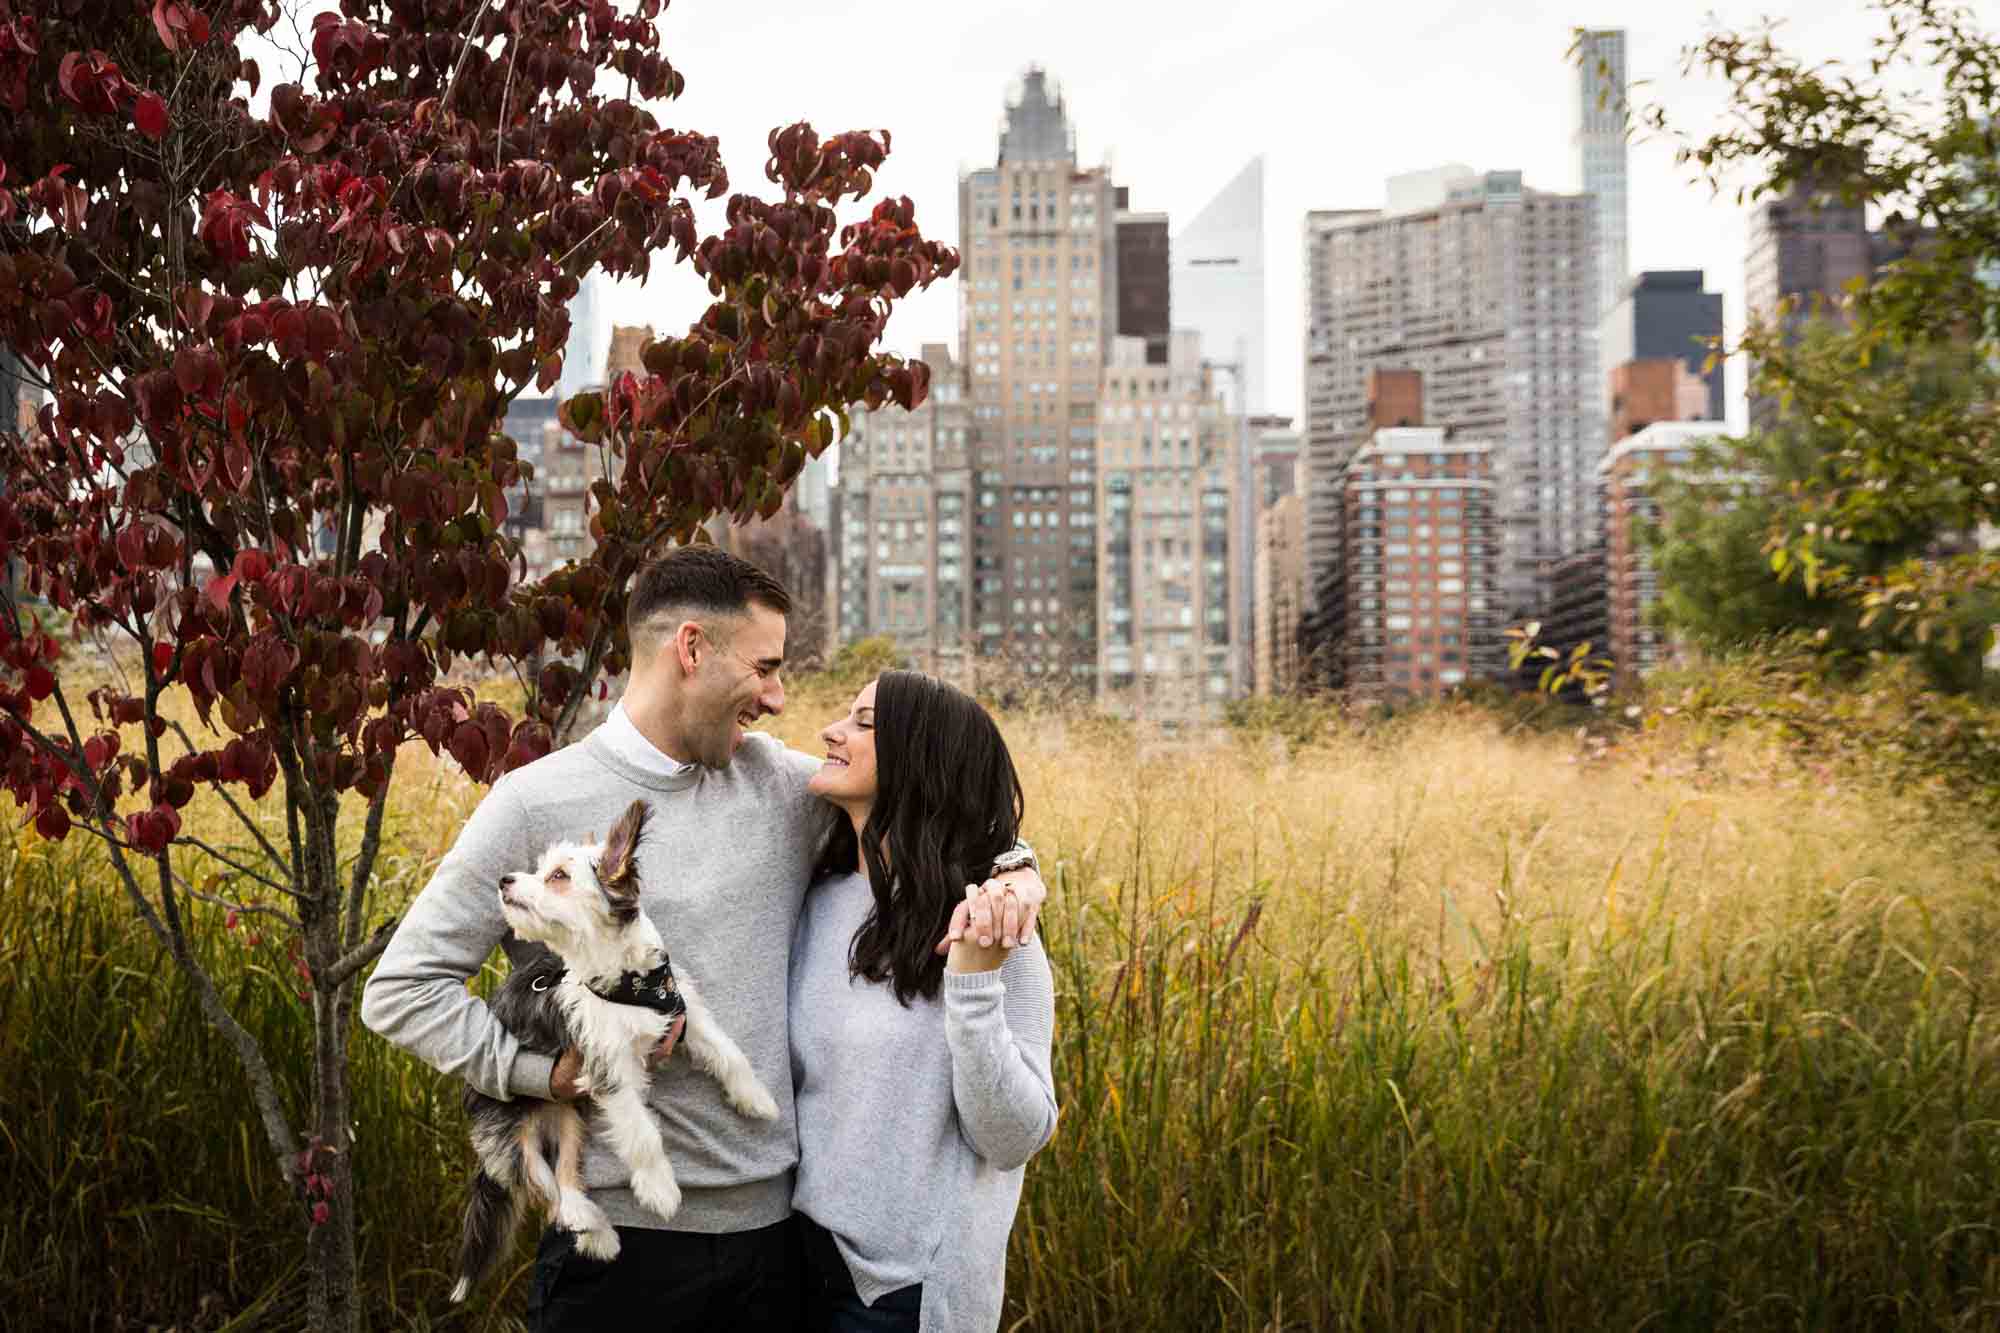 Couple hugging and holding dog in front of NYC skyline and grass for an article on pet engagement photo tips